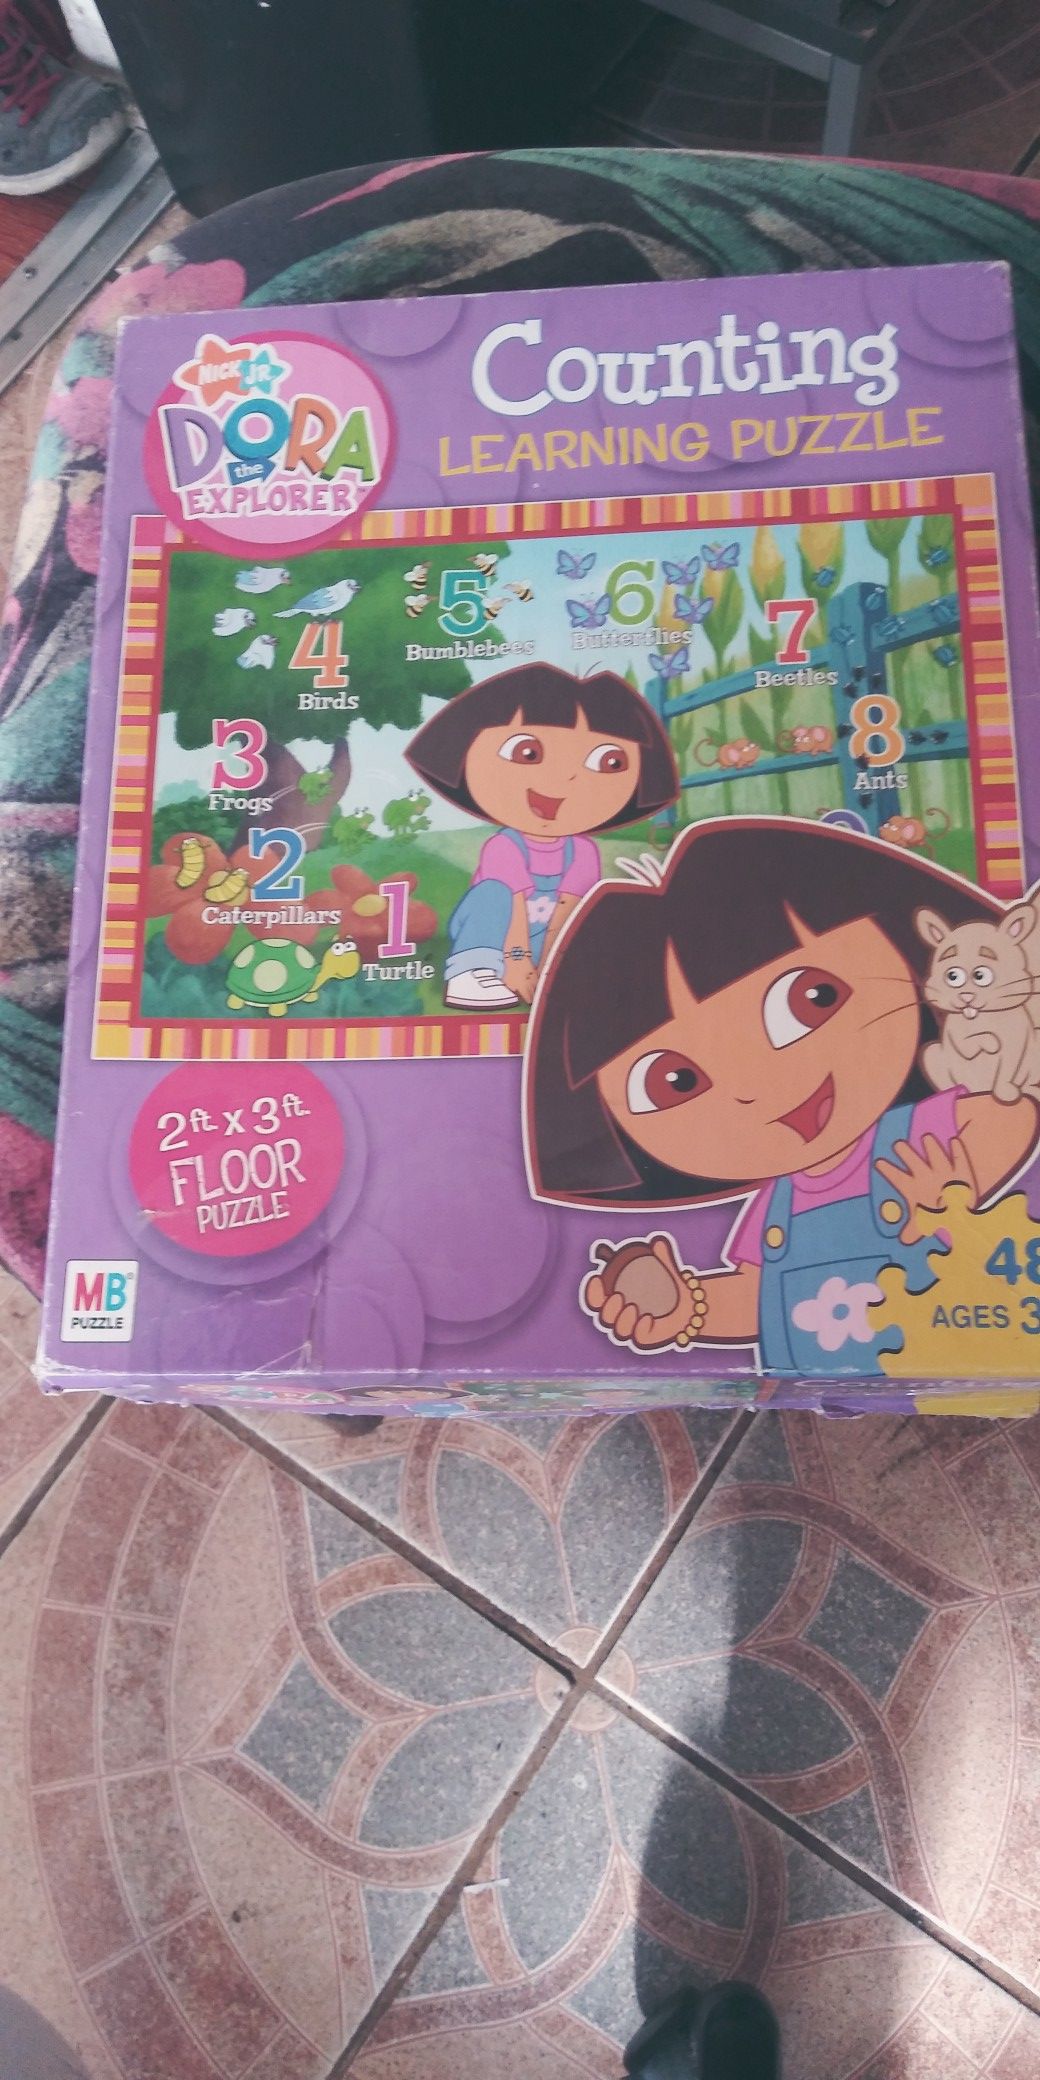 Dora the explorer counting learning puzzle